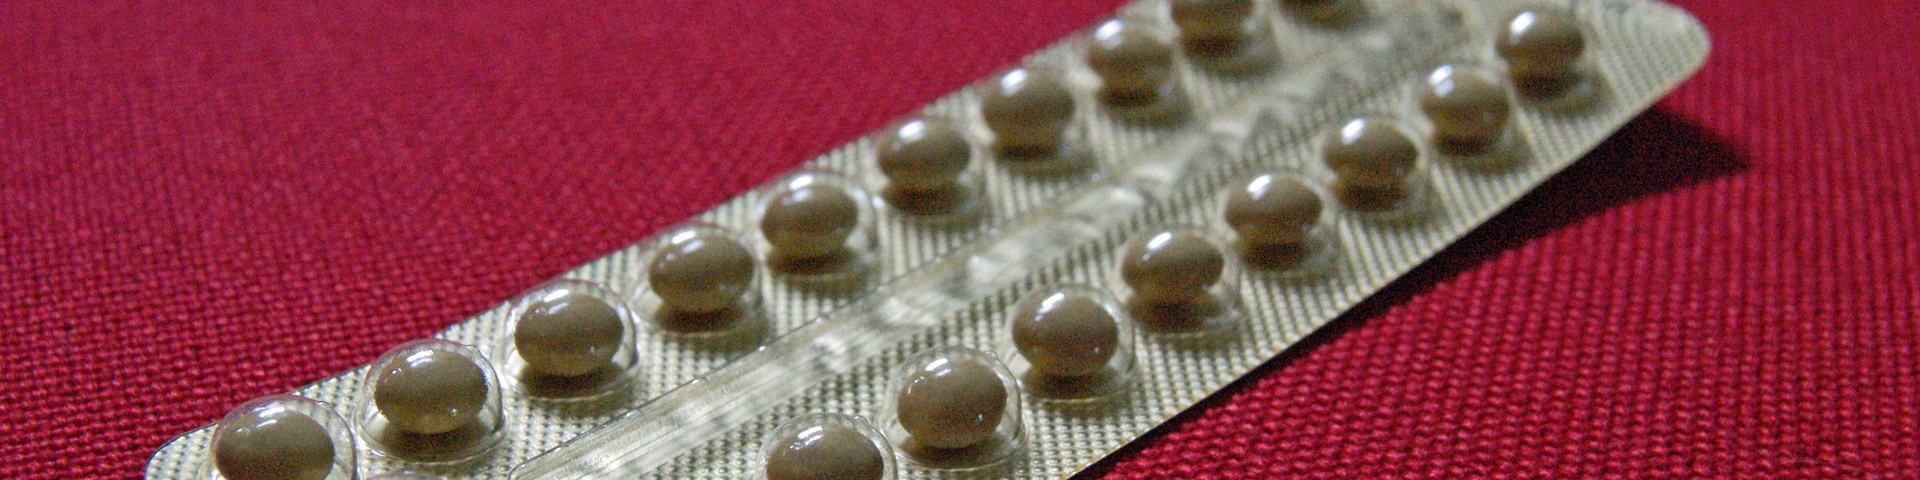 Contraception Pills Produced Without Money from Catholic Investment Portfolio